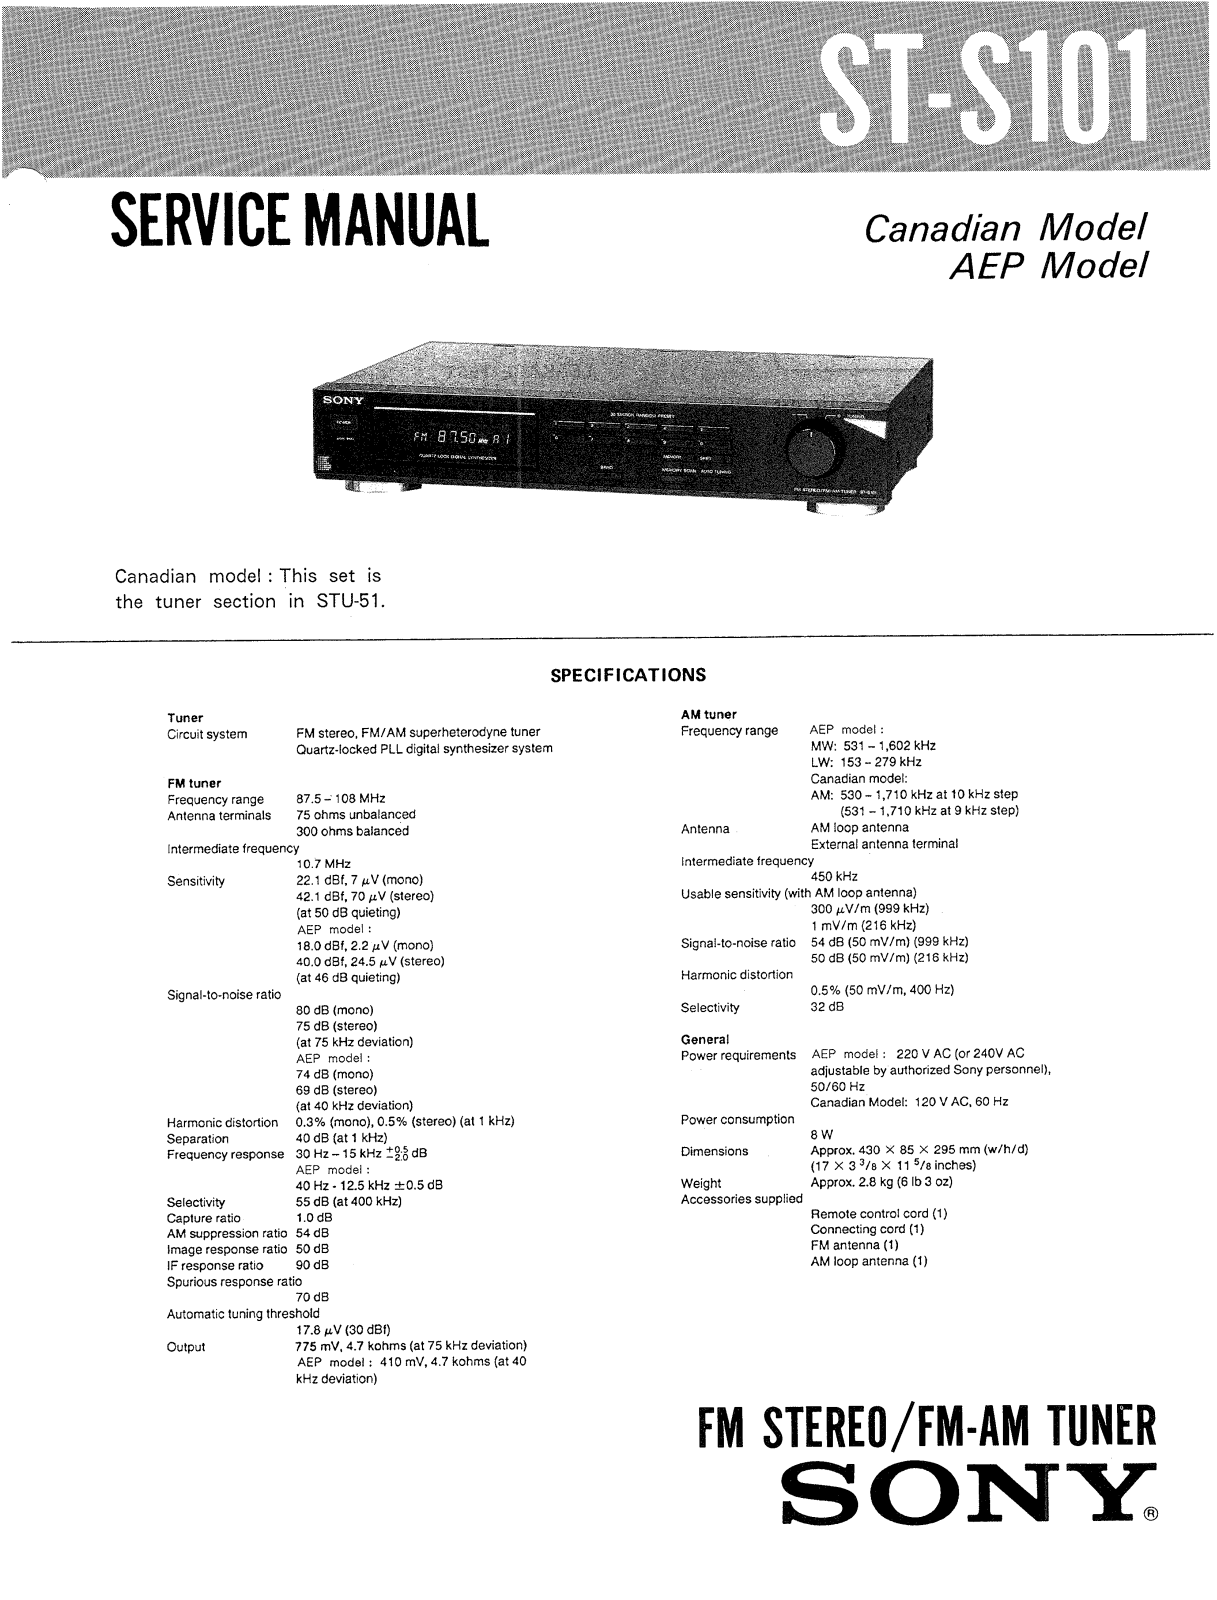 Sony STS-101 Service manual